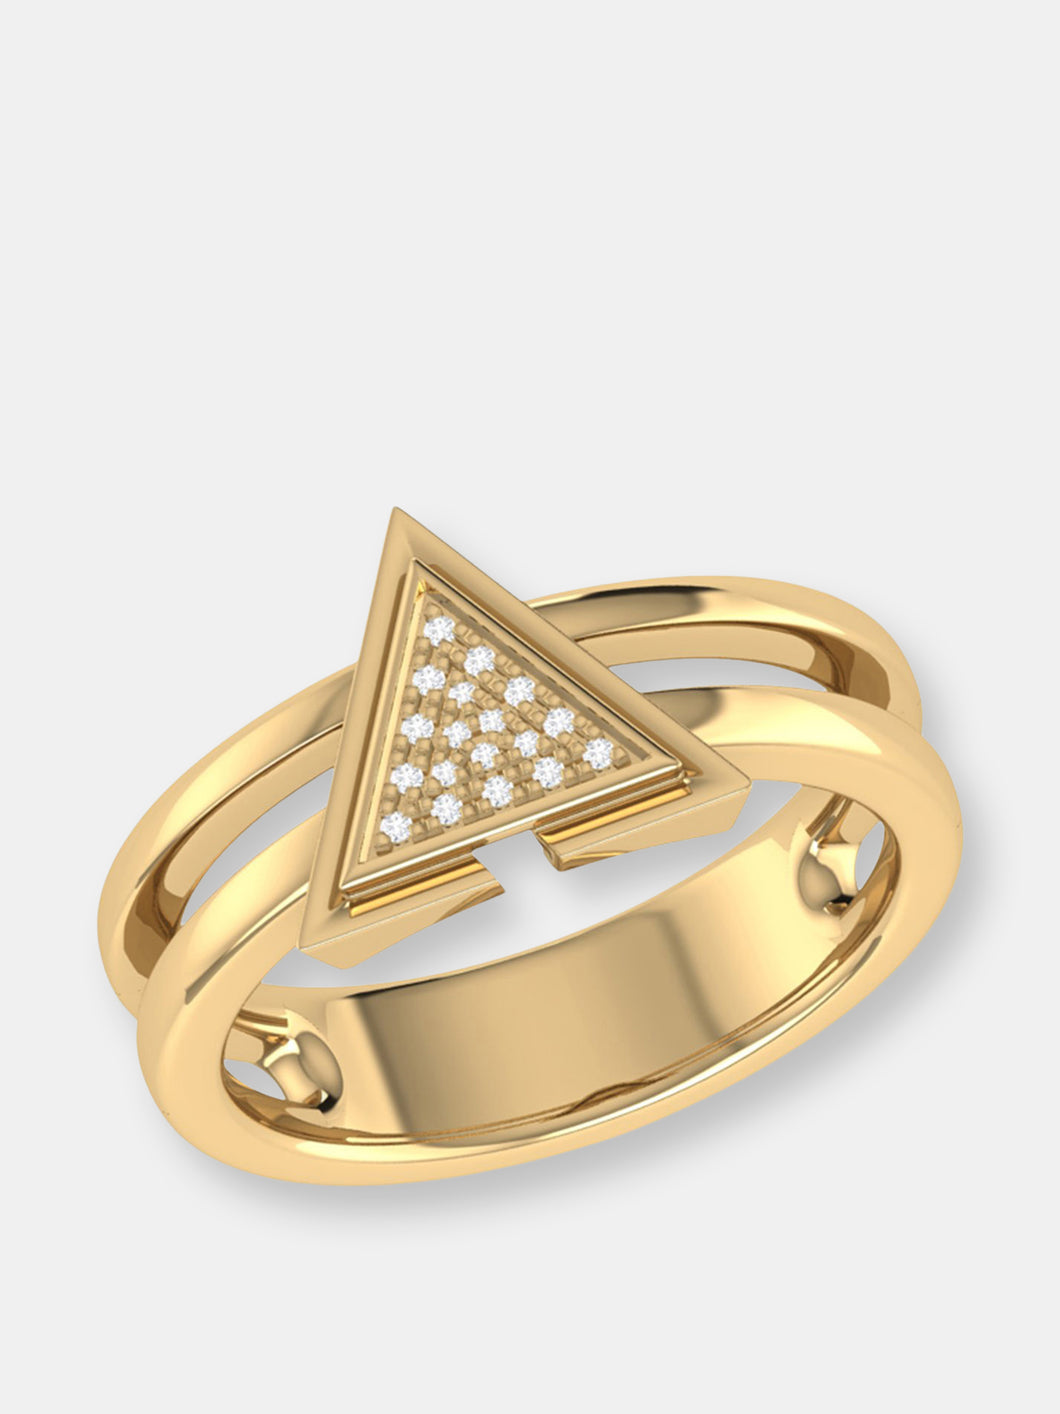 On Point Triangle Diamond Ring in 14K Yellow Gold Vermeil on Sterling Silver